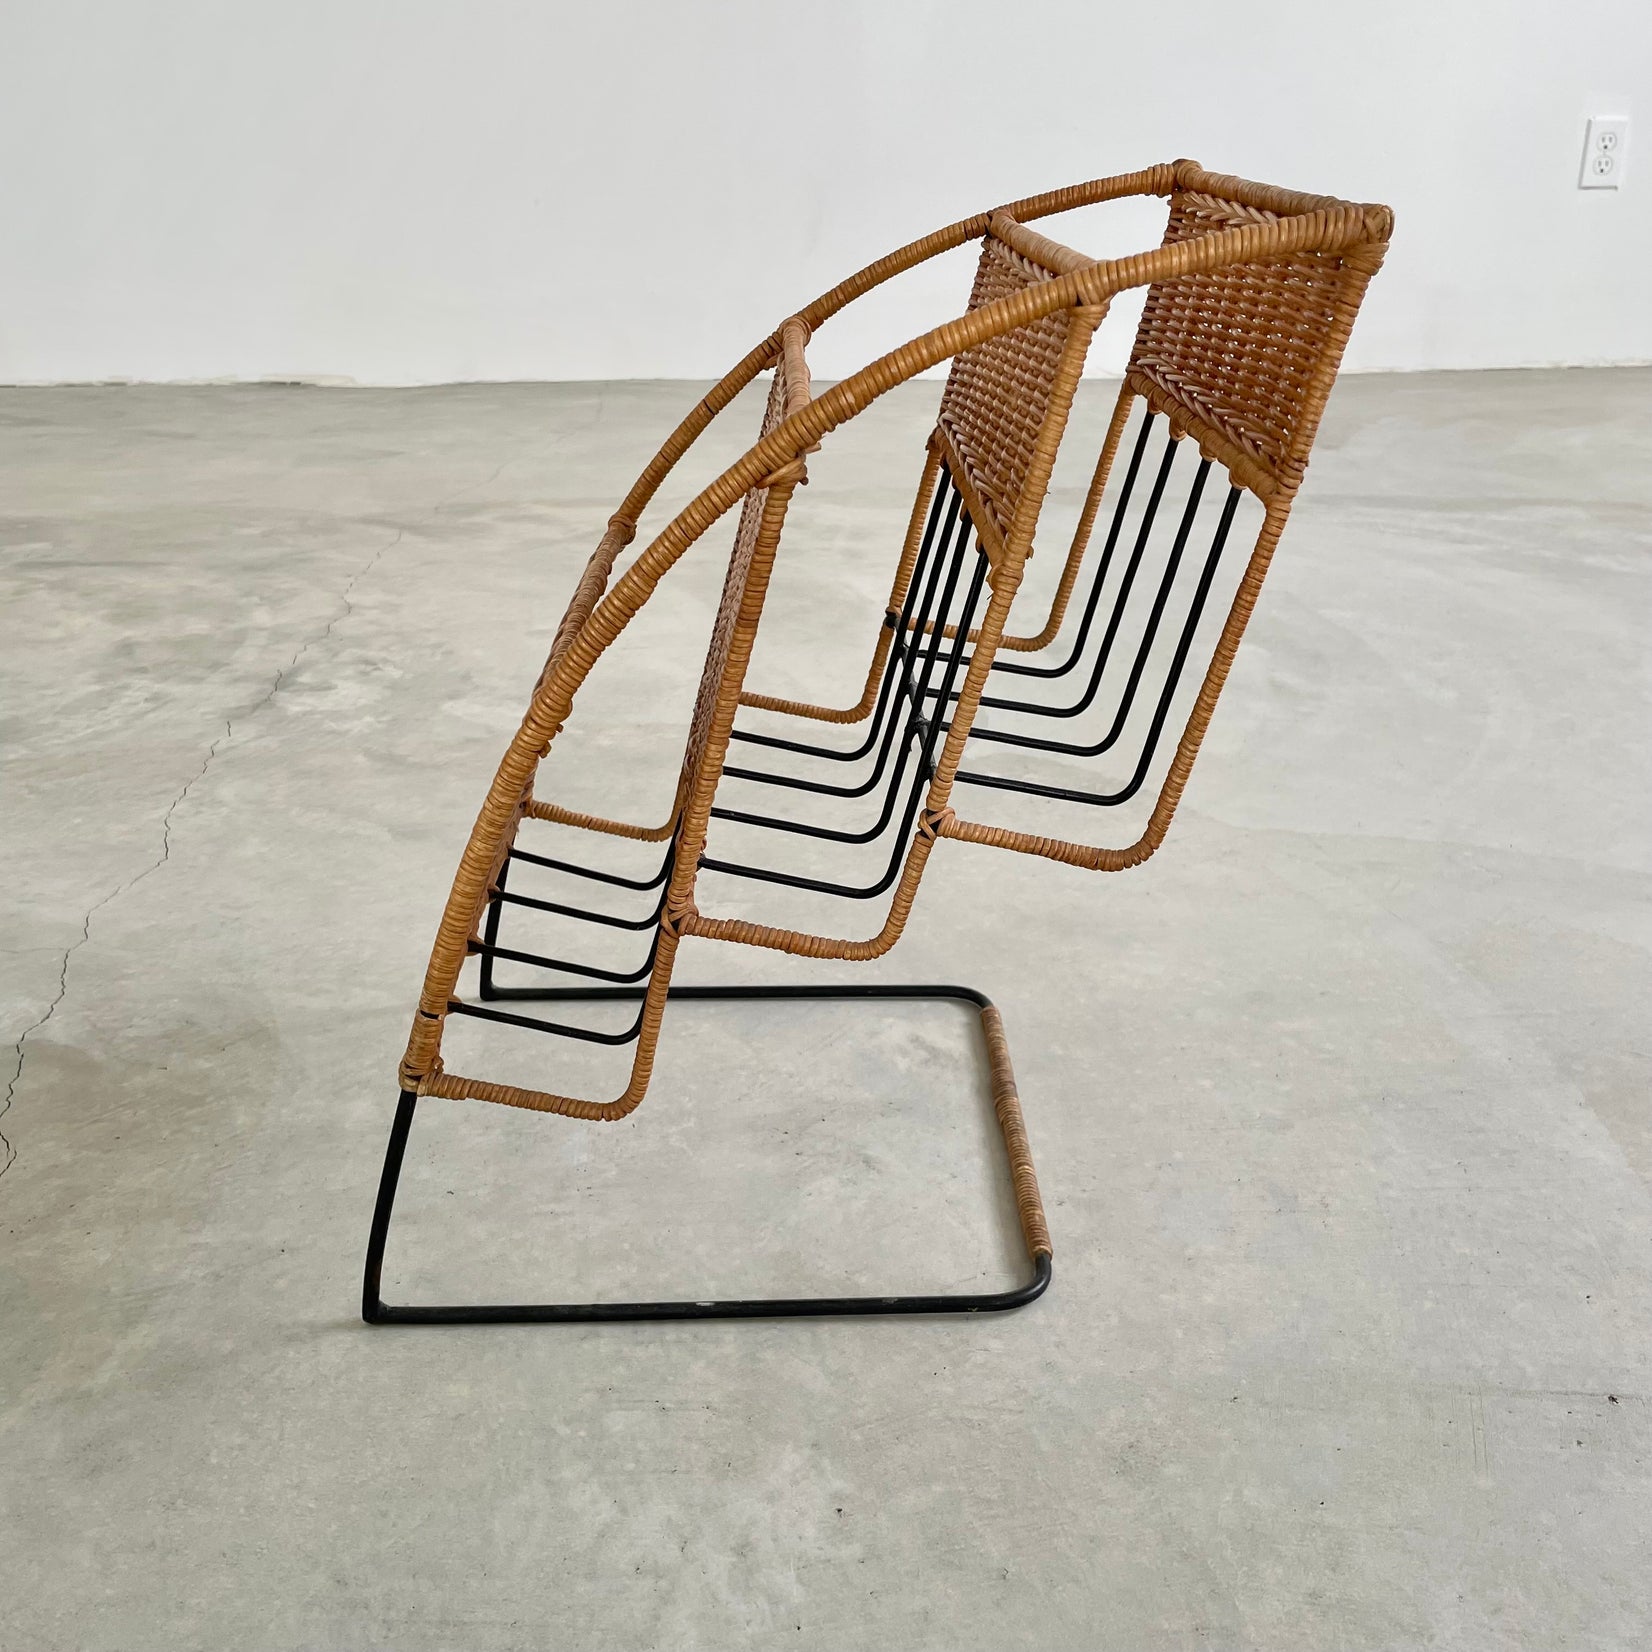 Rattan and Iron Magazine Rack attributed to Jacques Adnet, 1950s France